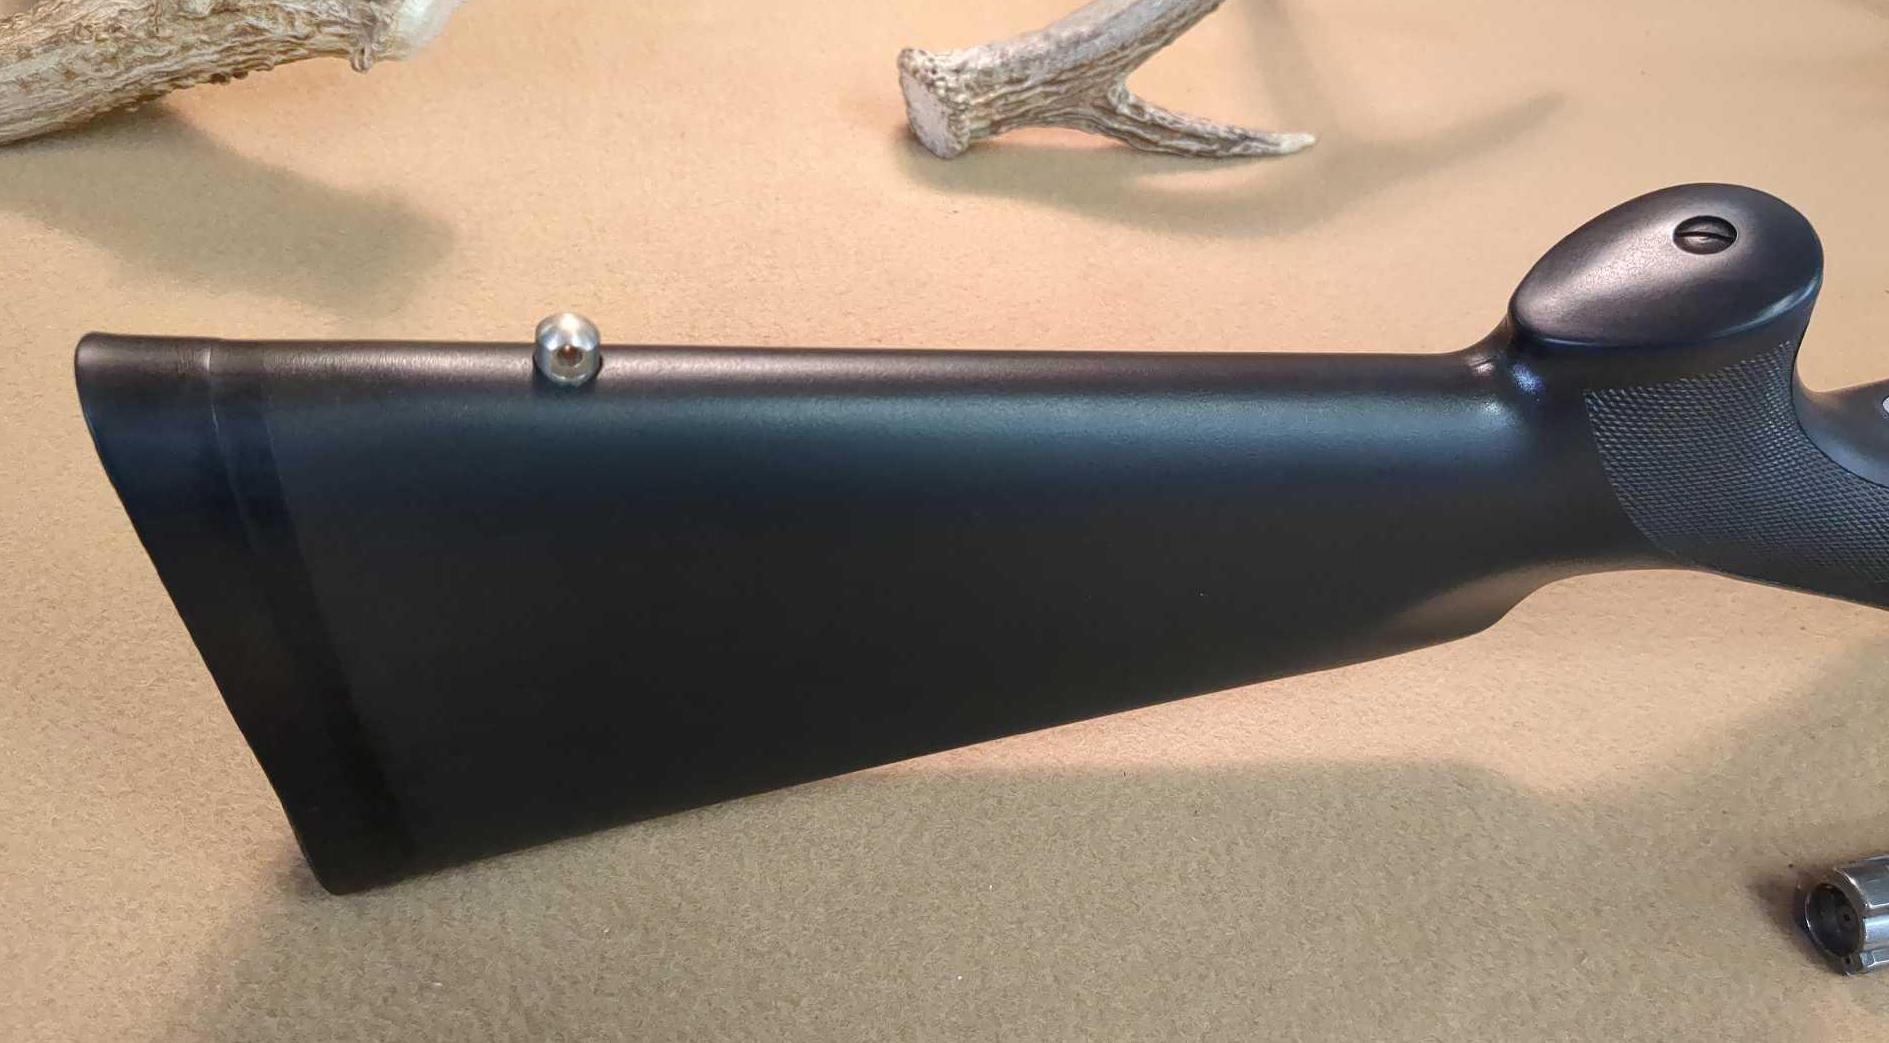 BROWNING MODEL A-BOLT II S-8 COMPOSITE .300 WIN MAG BOLT ACTION RIFLE